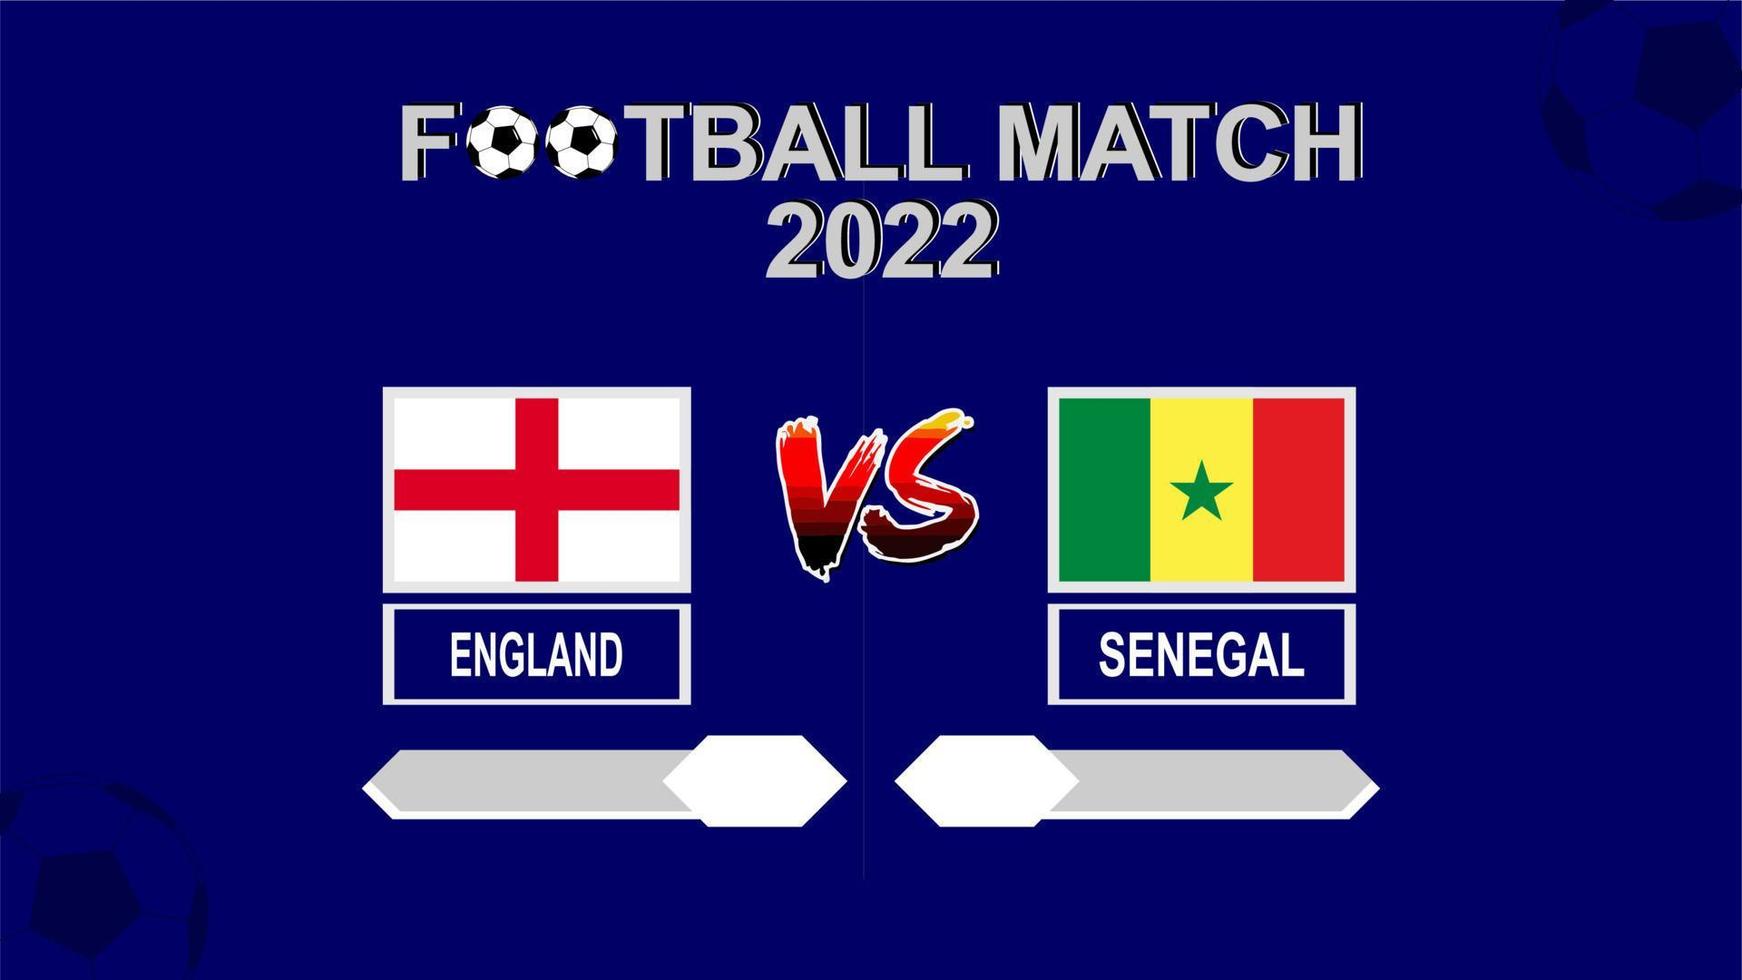 England vs Senegal football cup 2022 blue template background vector for schedule or result match